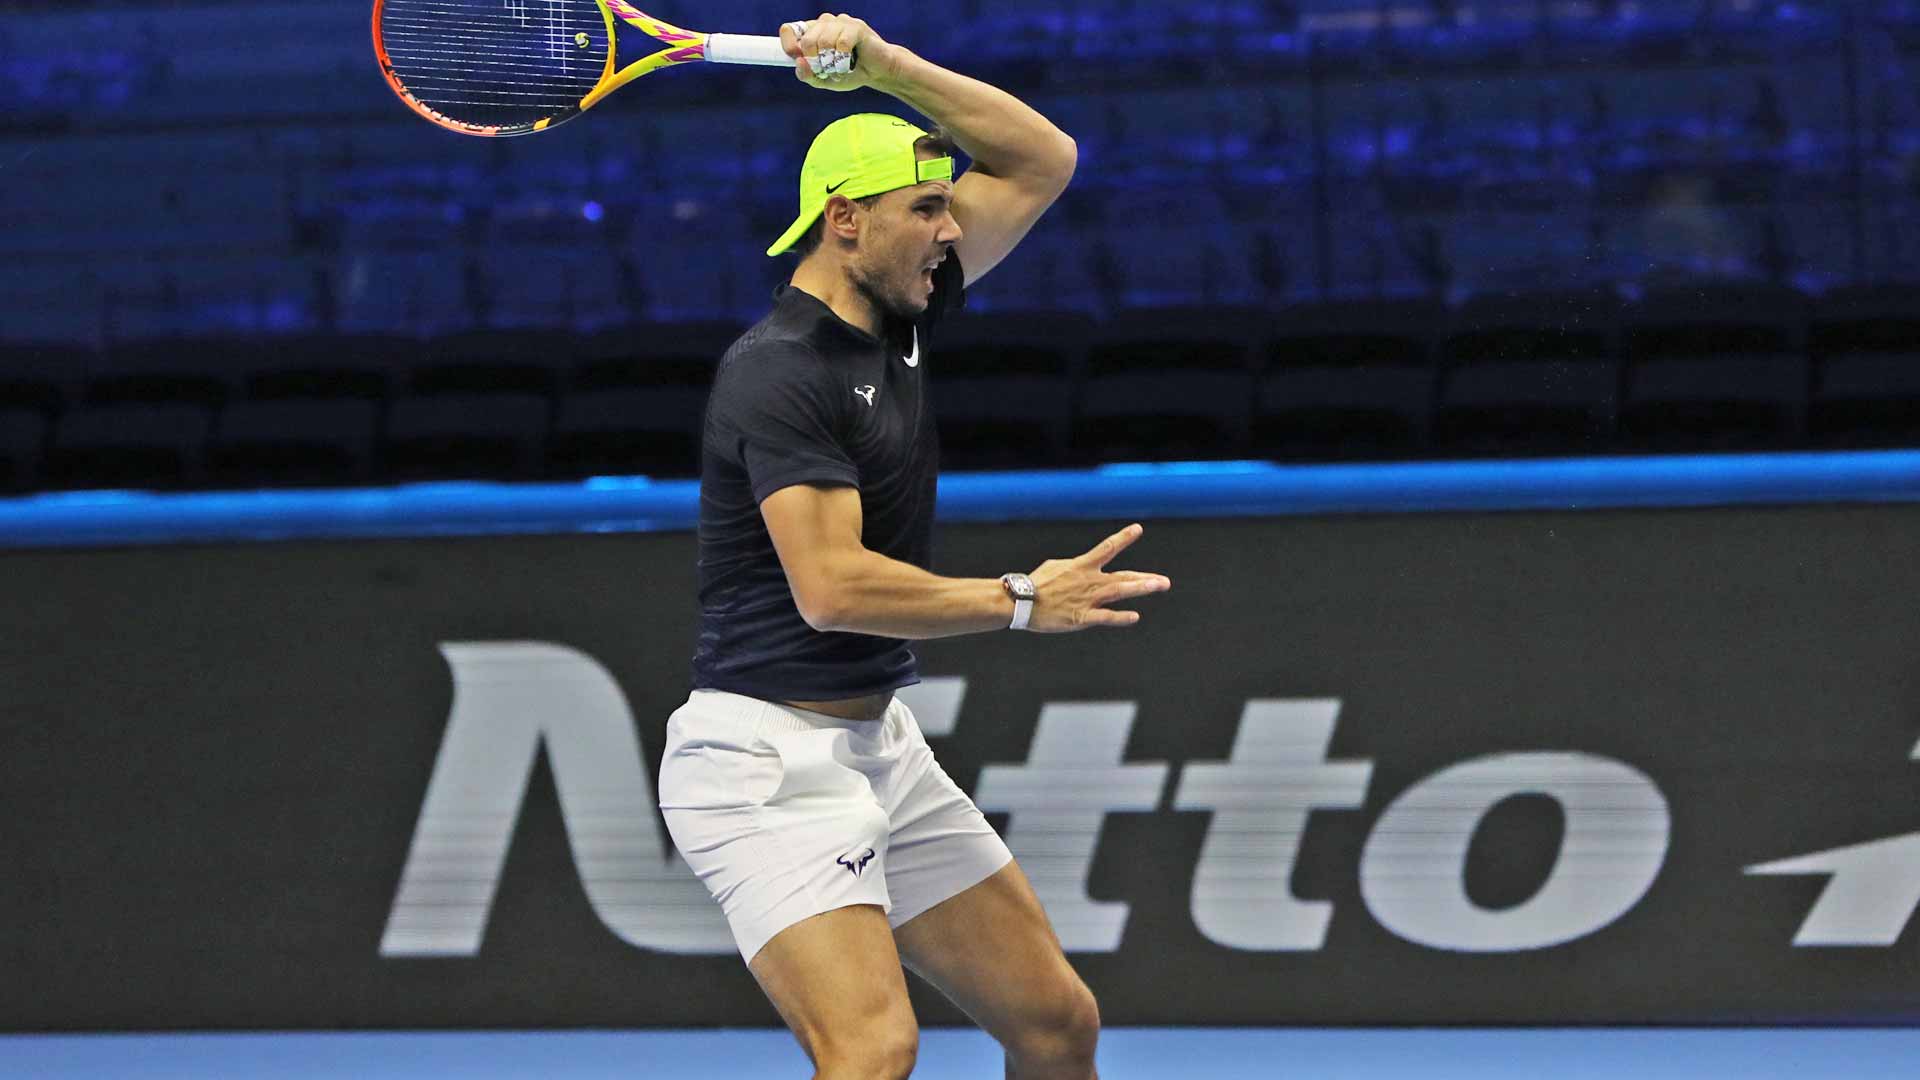 Rafael Nadal will be the top seed at the Nitto ATP Finals in Turin.